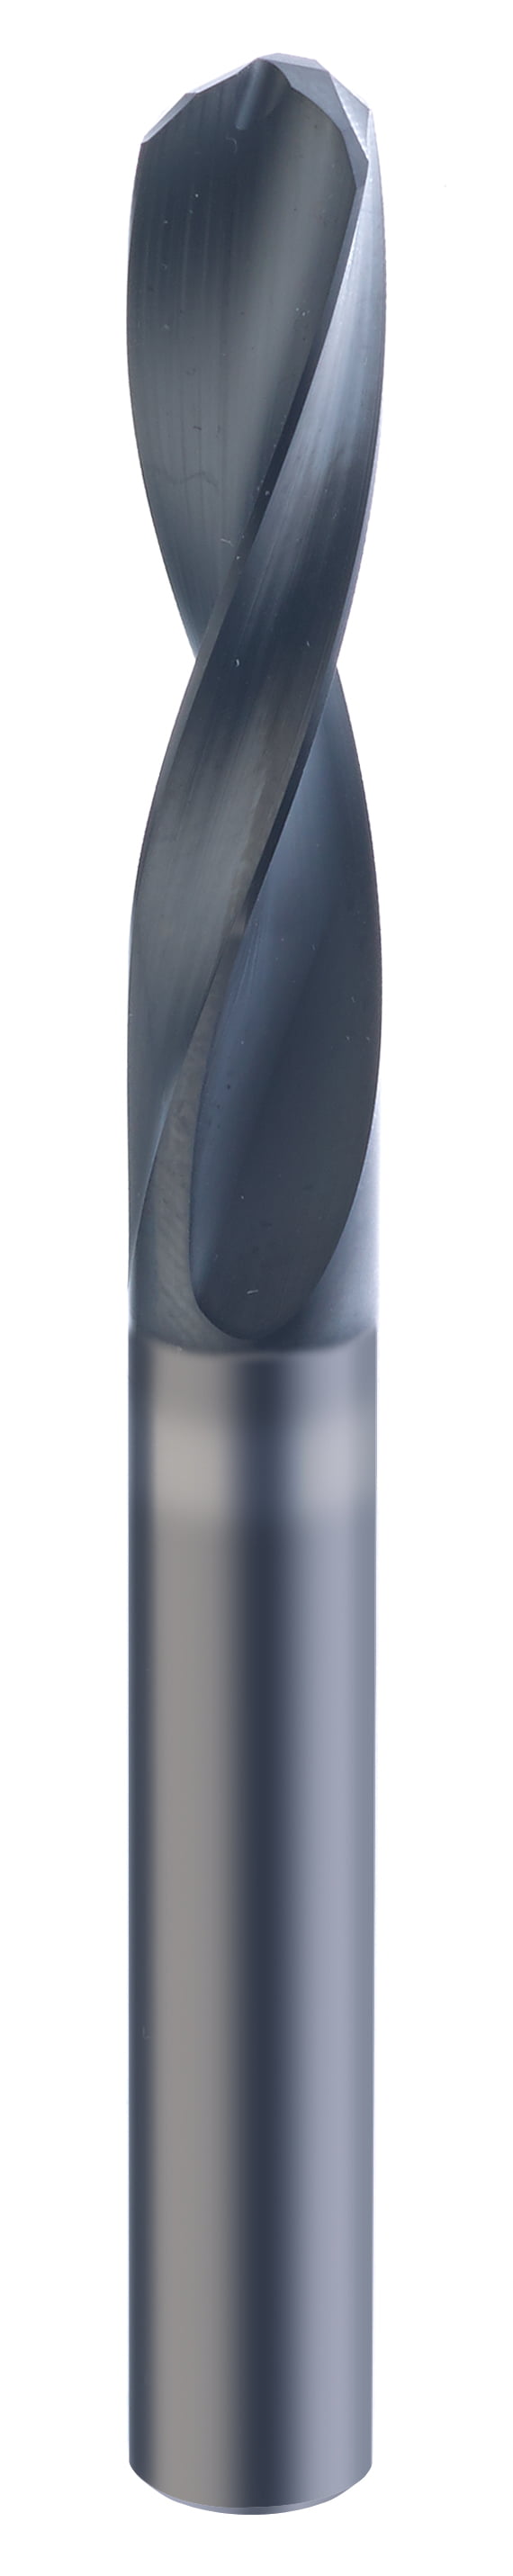 3.20mm Dia, 145 Degree Point, Solid Carbide Drill - 50004